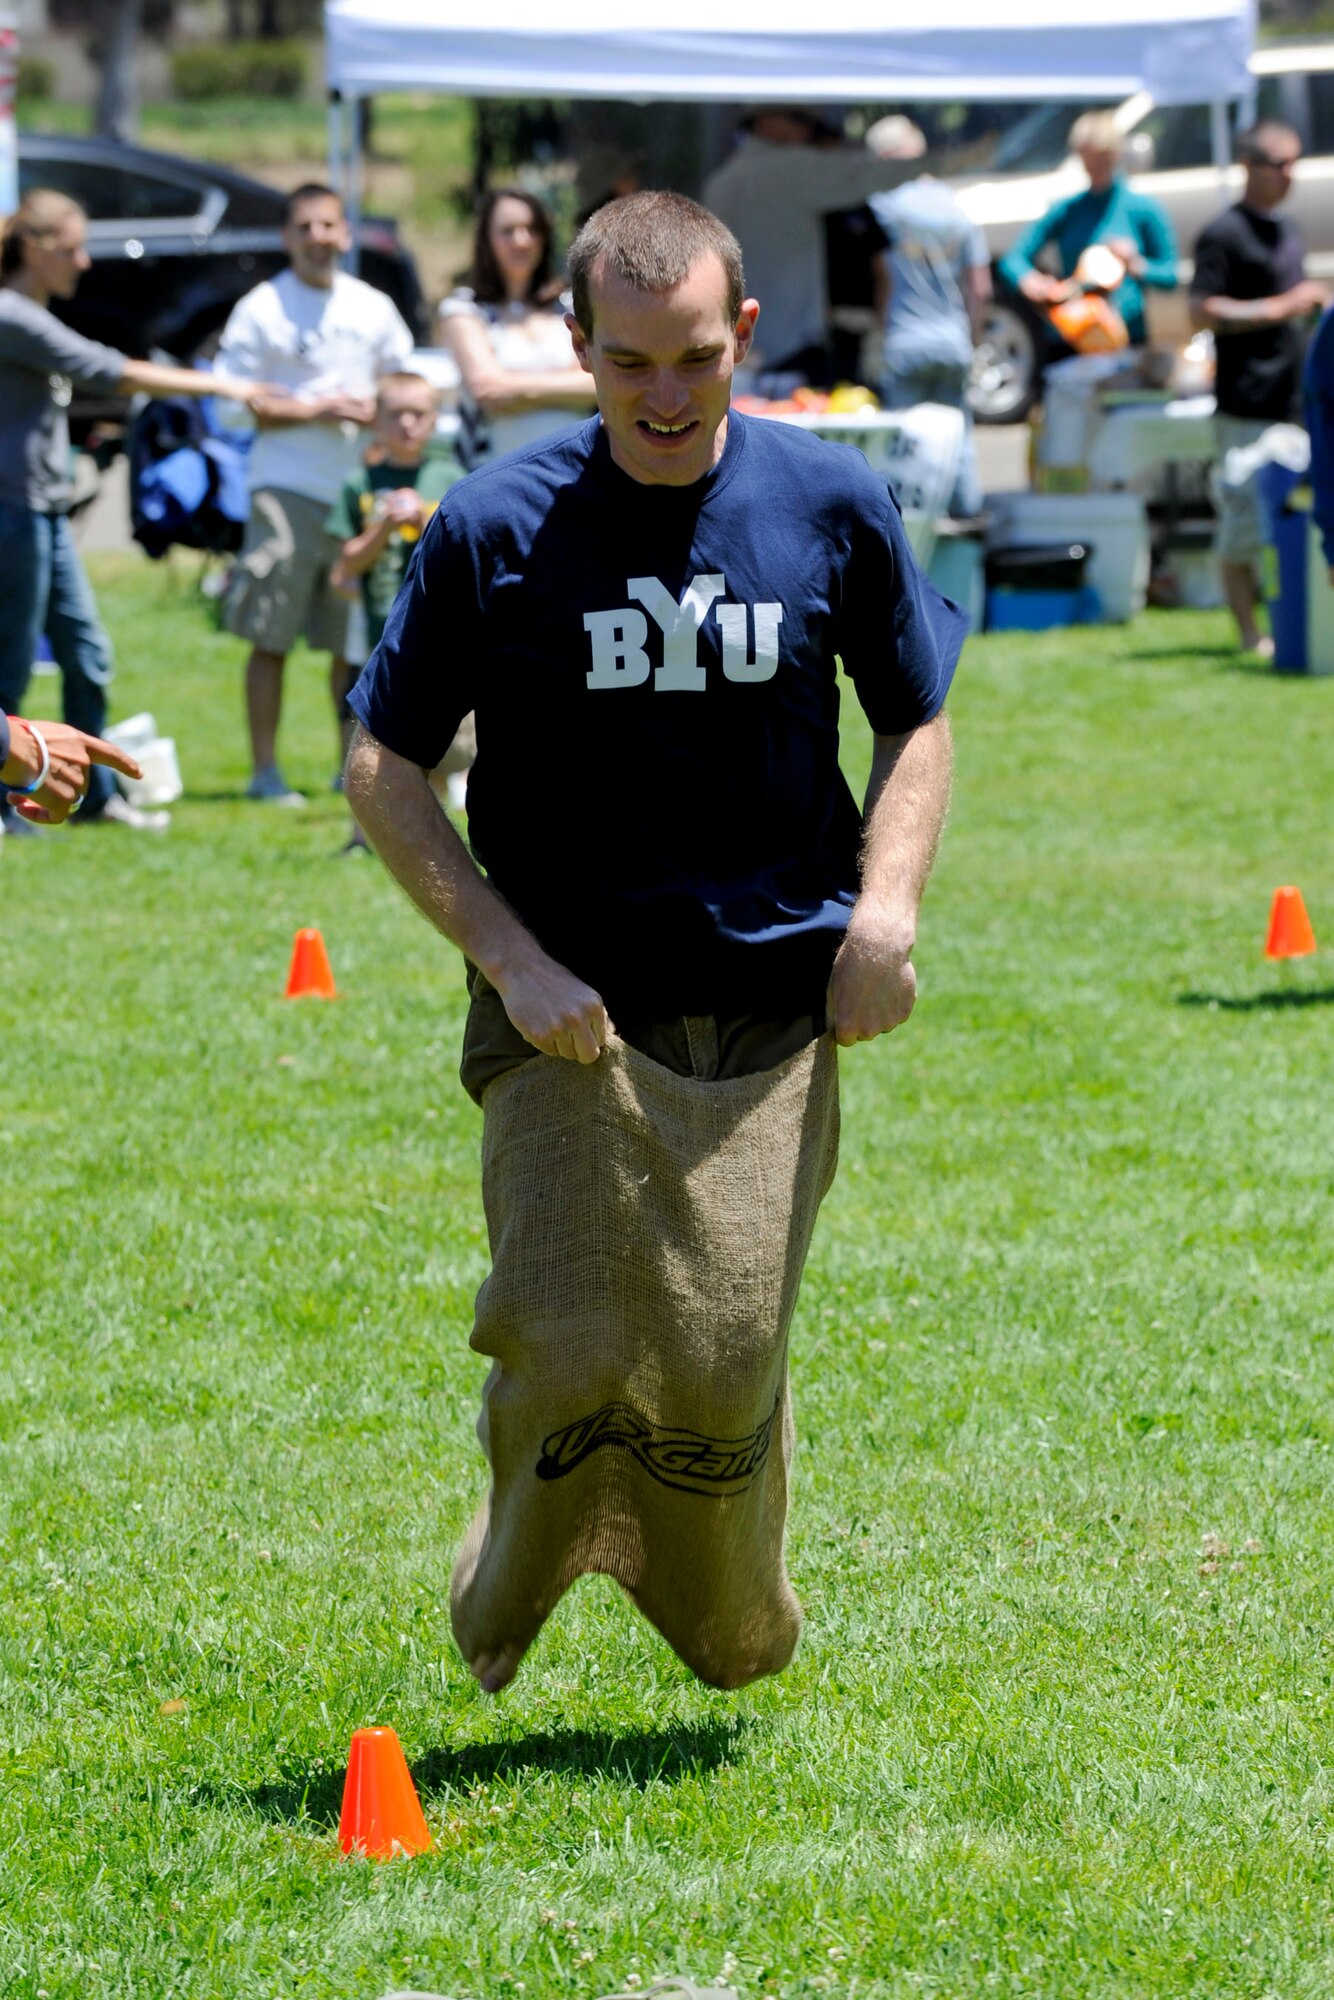 VANDENBERG AIR FORCE BASE, Calif. -- 1st Lt. Matt Folks, a 30th Operations Group range operations commander, competes in a potato sack race during Vandenberg's Independence Day celebration here July 7, 2012. More than 1200 Team V members came to base to celebrate their nations independence. (U.S. Air Force photo/Staff Sgt. Levi Riendeau)